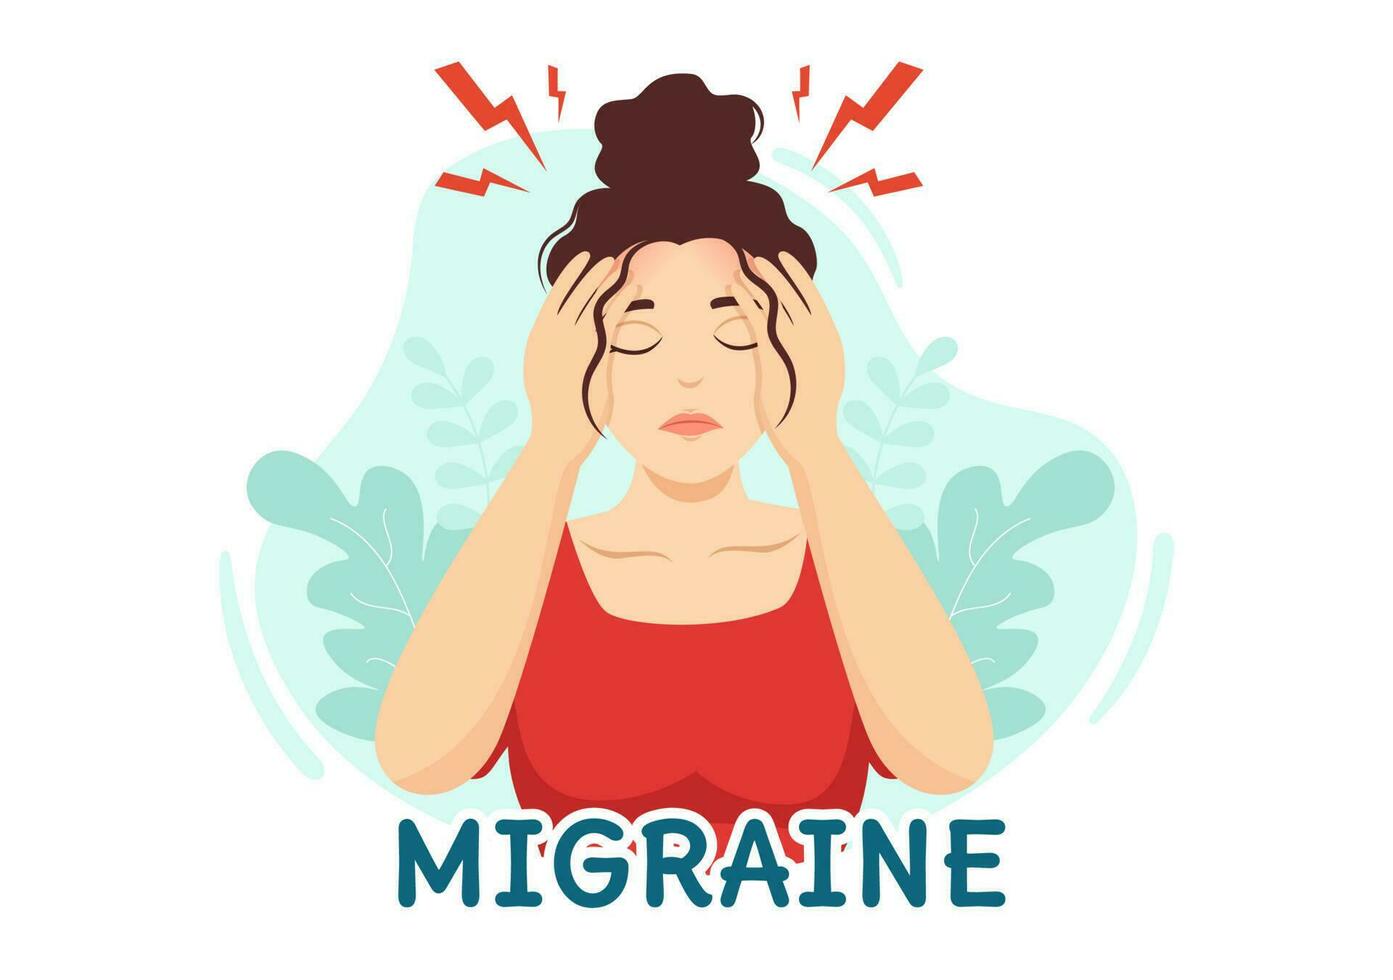 Migraine Vector Illustration People Suffers from Headaches, Stress and Migraines in Healthcare Flat Cartoon Hand Drawn Background Templates